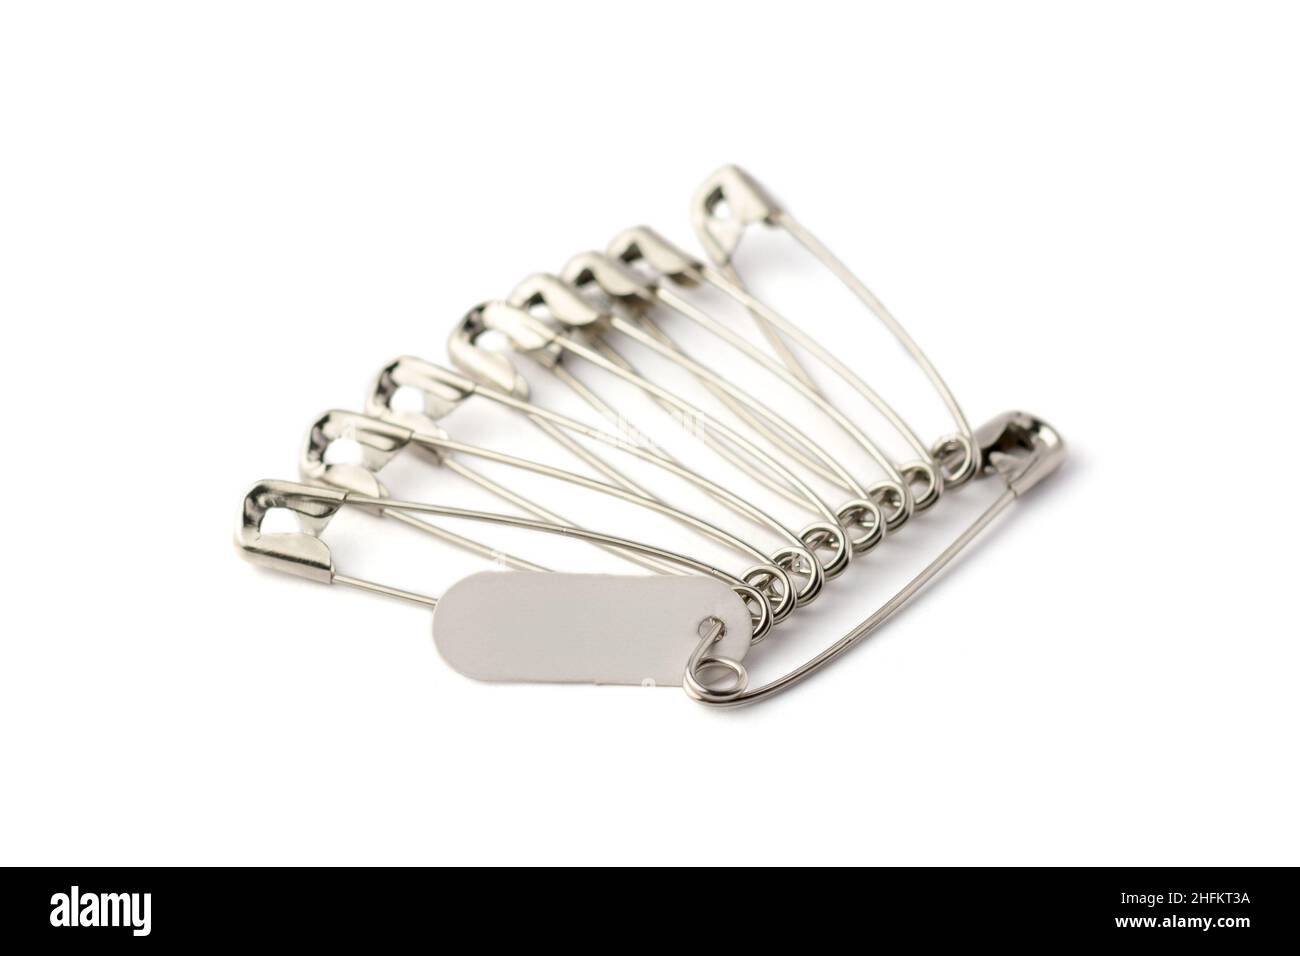 metal regular safety pins with empty tag, commonly used to fasten clothing, taken in shallow depth of field isolated in white background Stock Photo